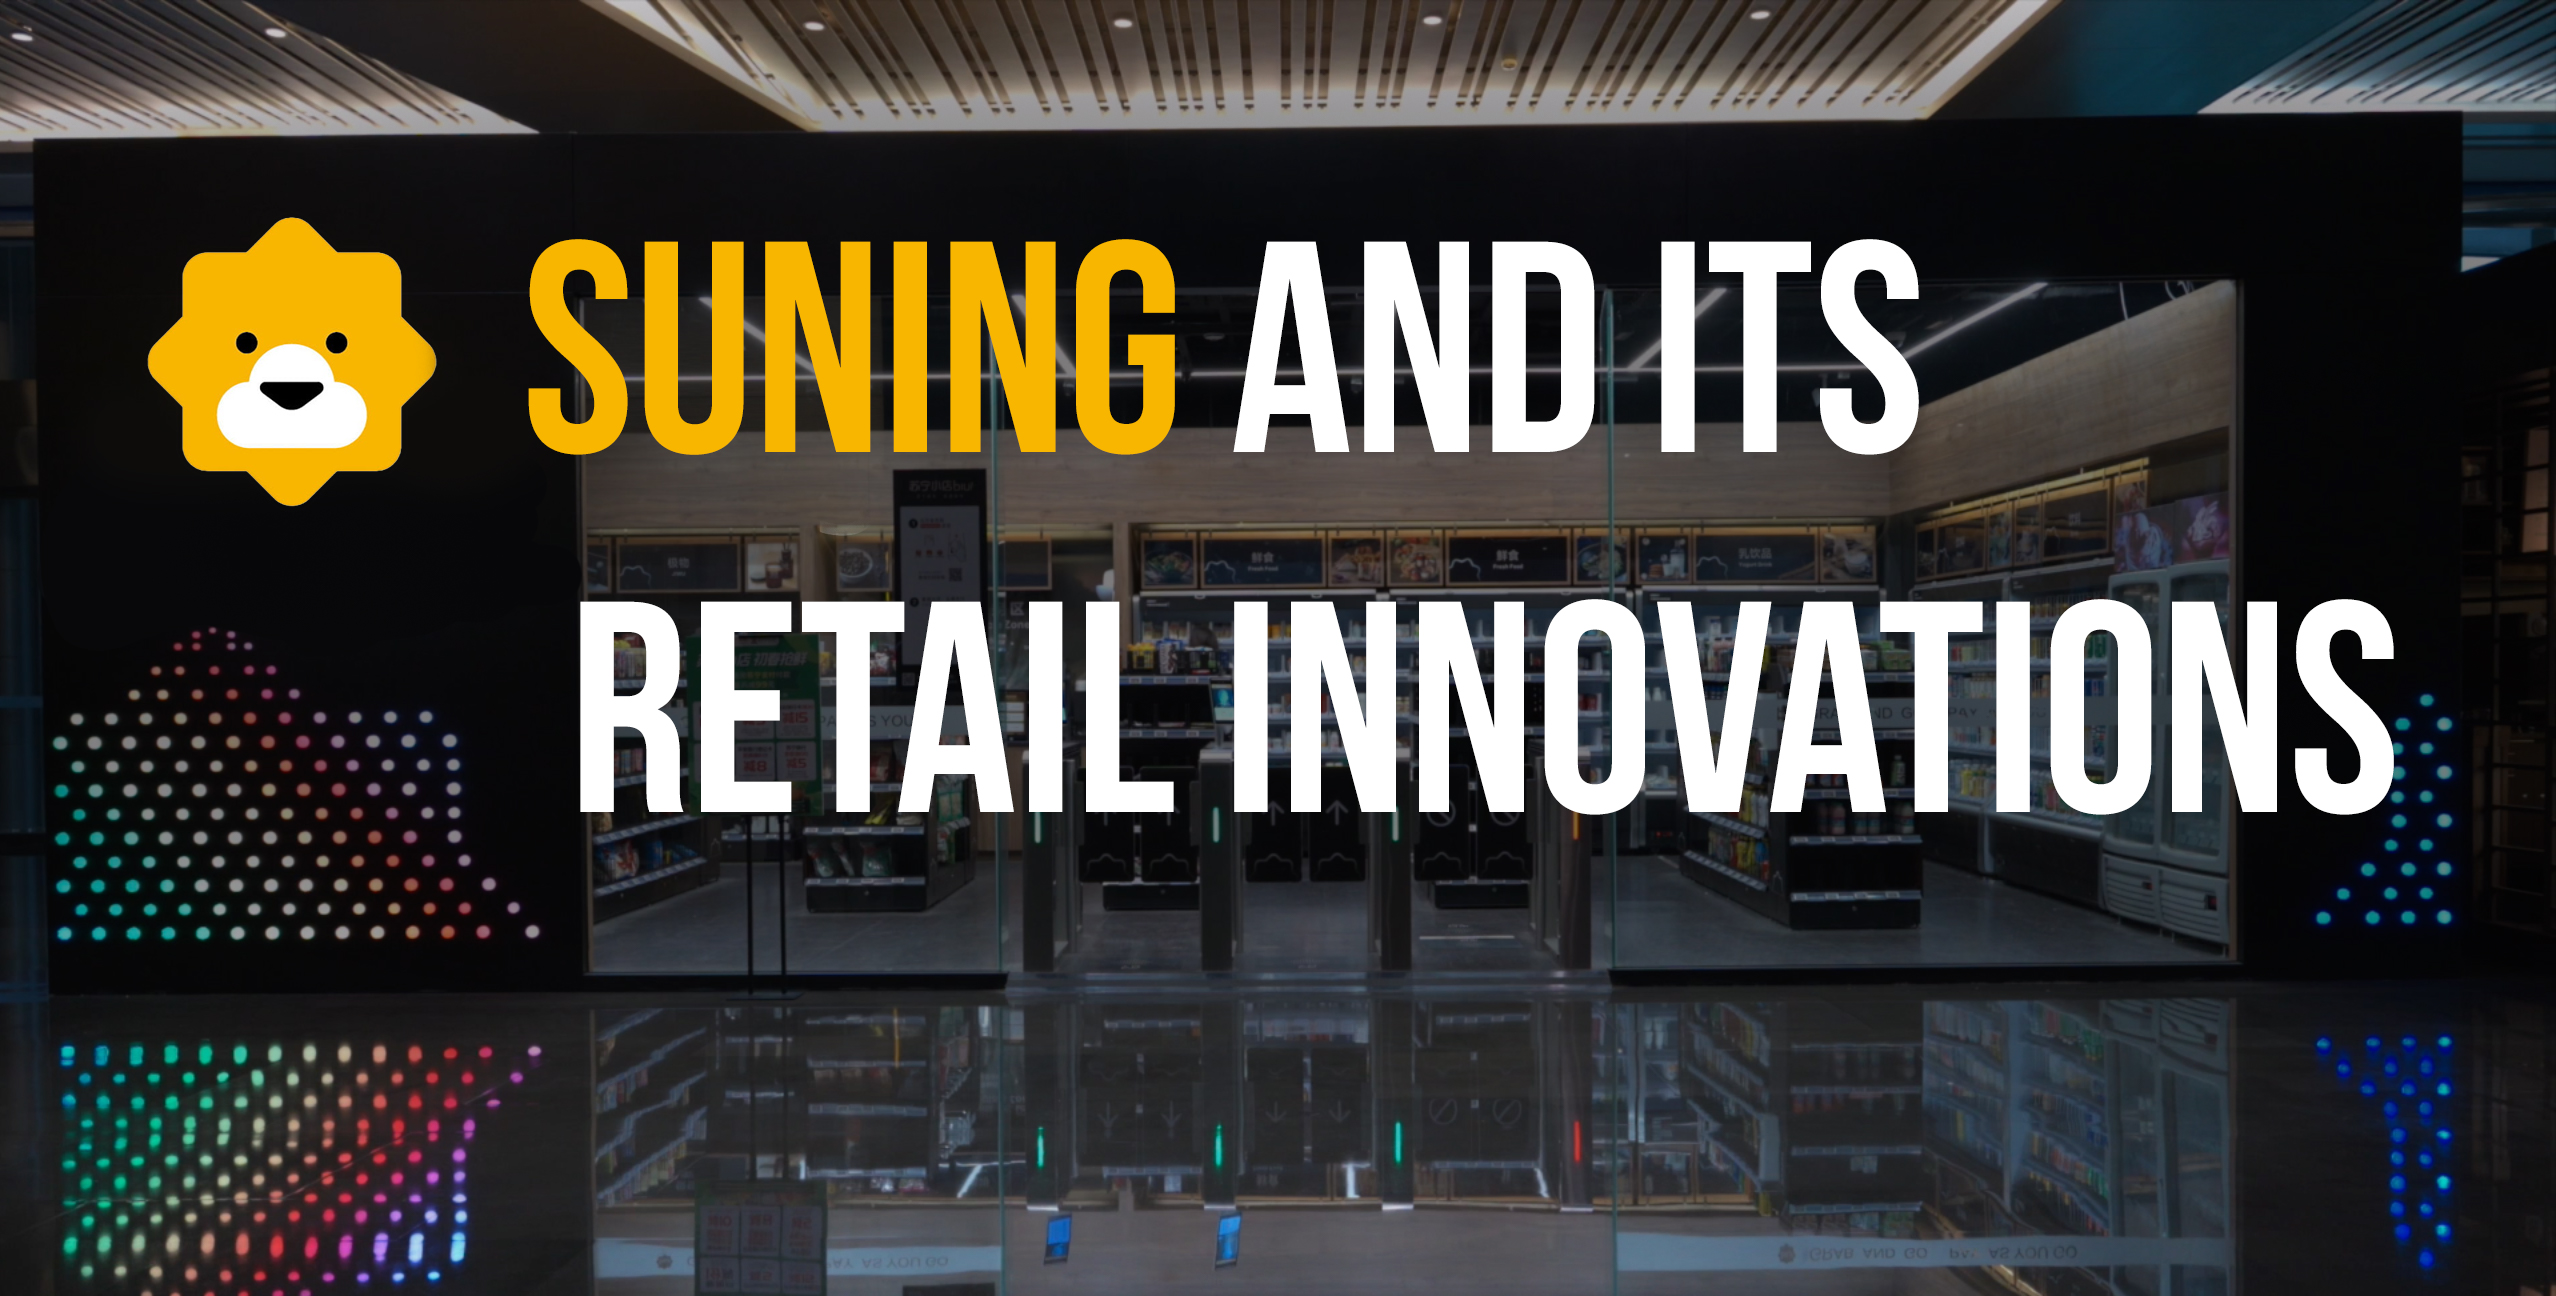 How Does Chinese Retail Conglomerate Suning Drive New Retail Innovations?